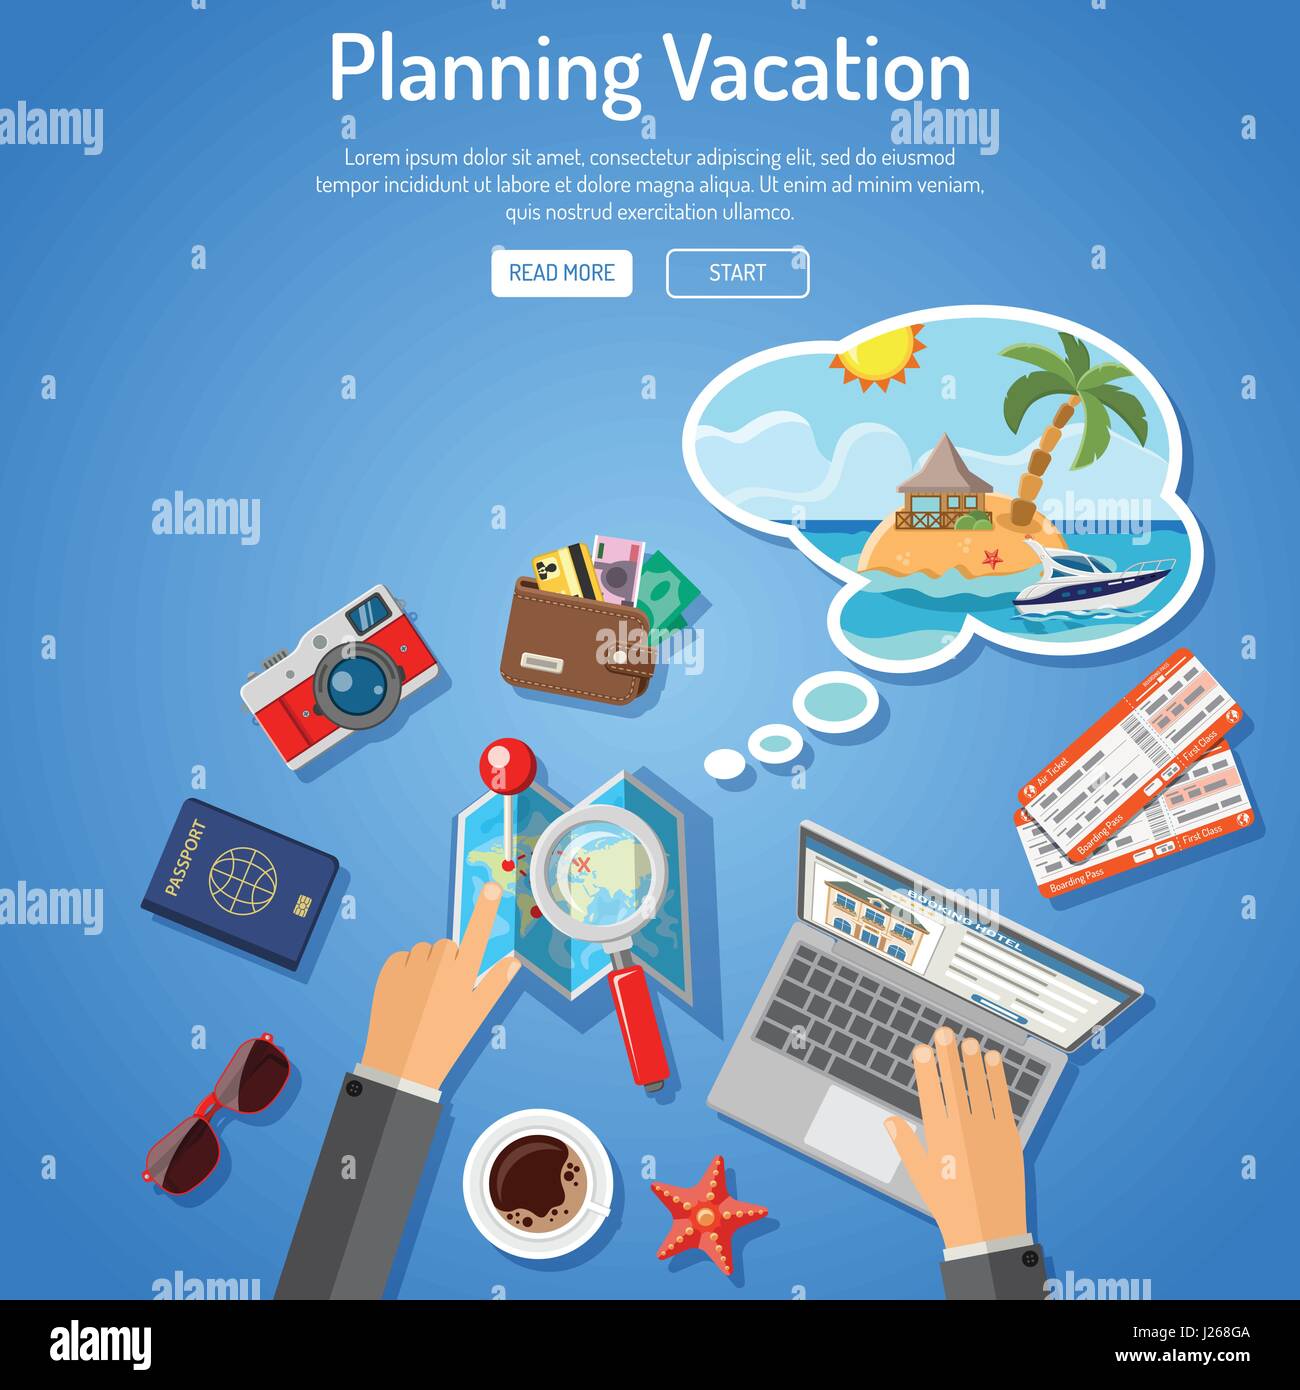 Planning Vacation Concept Stock Vector